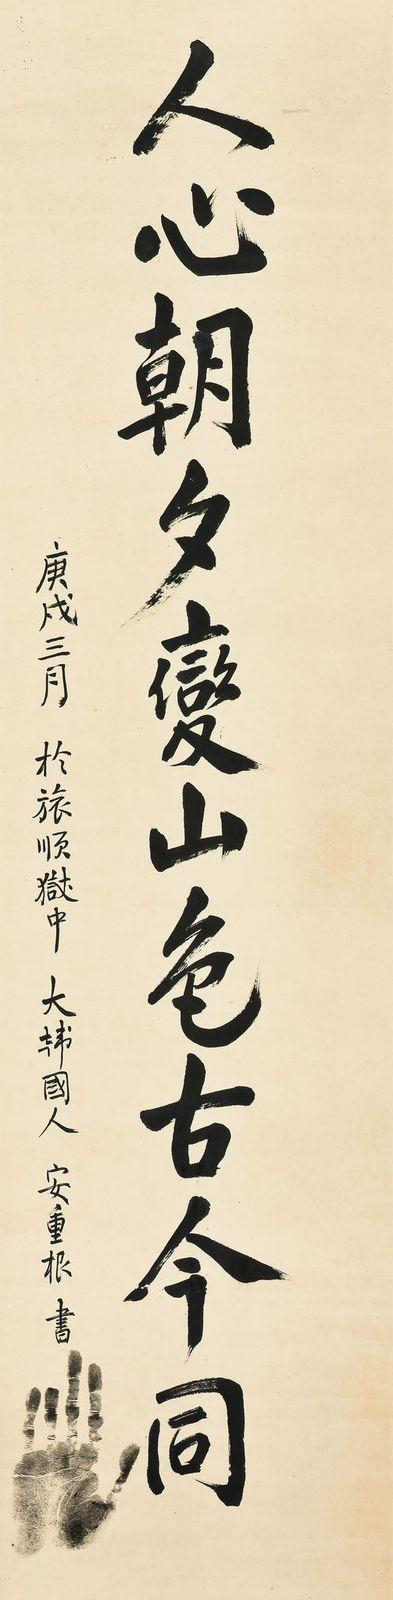 Ahn Jung-geun's calligraphy work, which had never been revealed to the public before, was auctioned off on Tuesday for 1.3 billion won by Seoul Auction. [SEOUL AUCTION] 